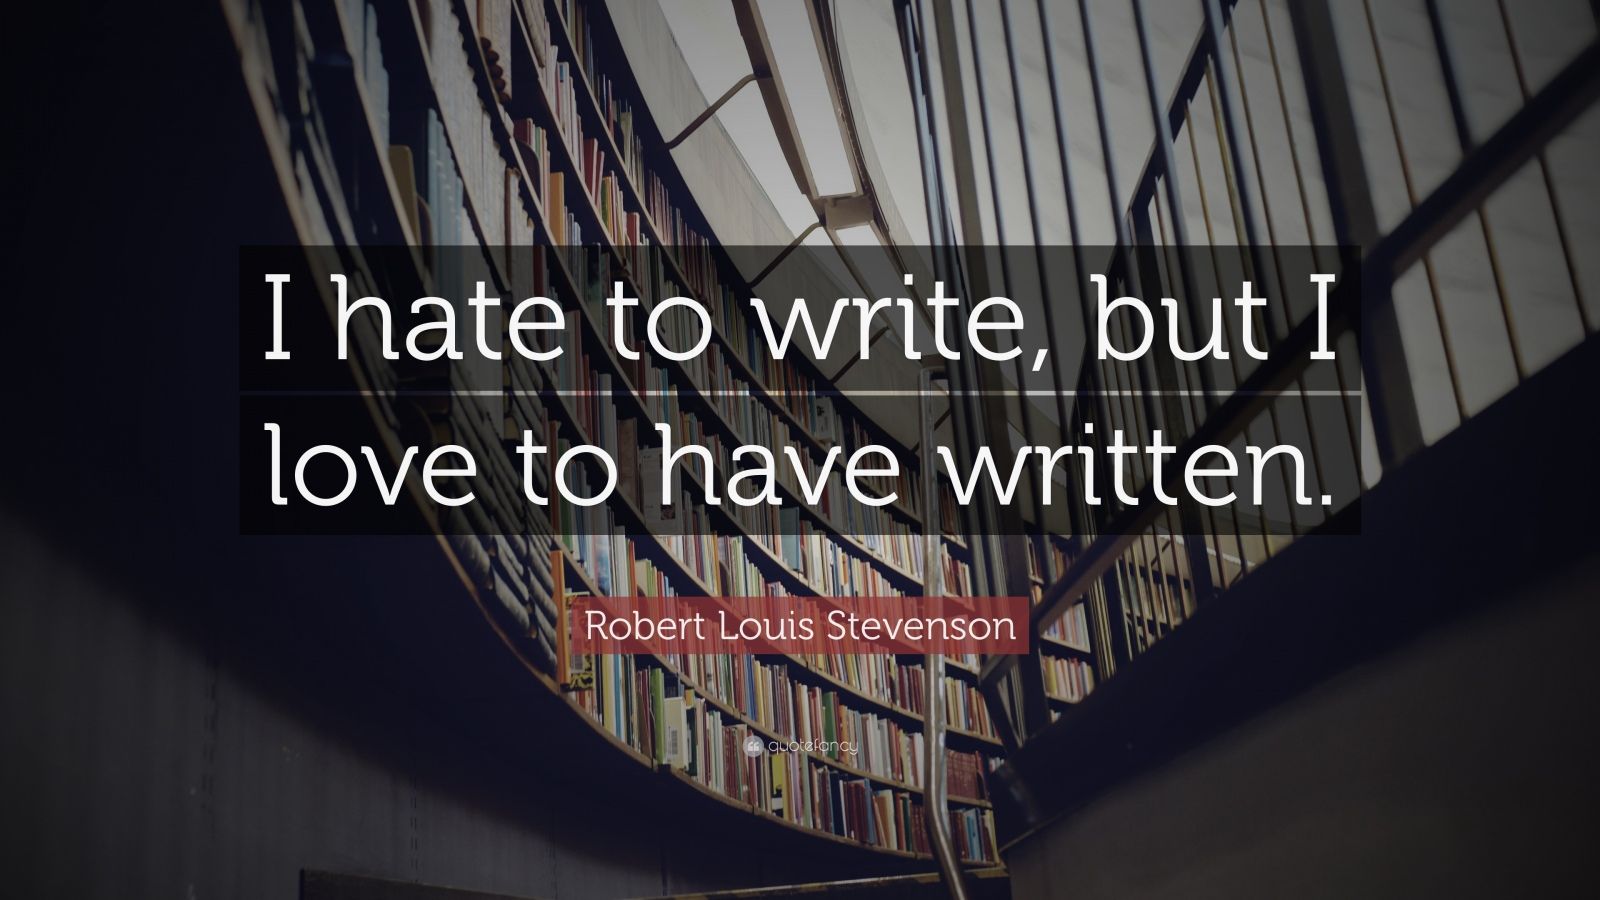 Robert Louis Stevenson Quote: “I hate to write, but I love to have written.” (10 wallpapers ...